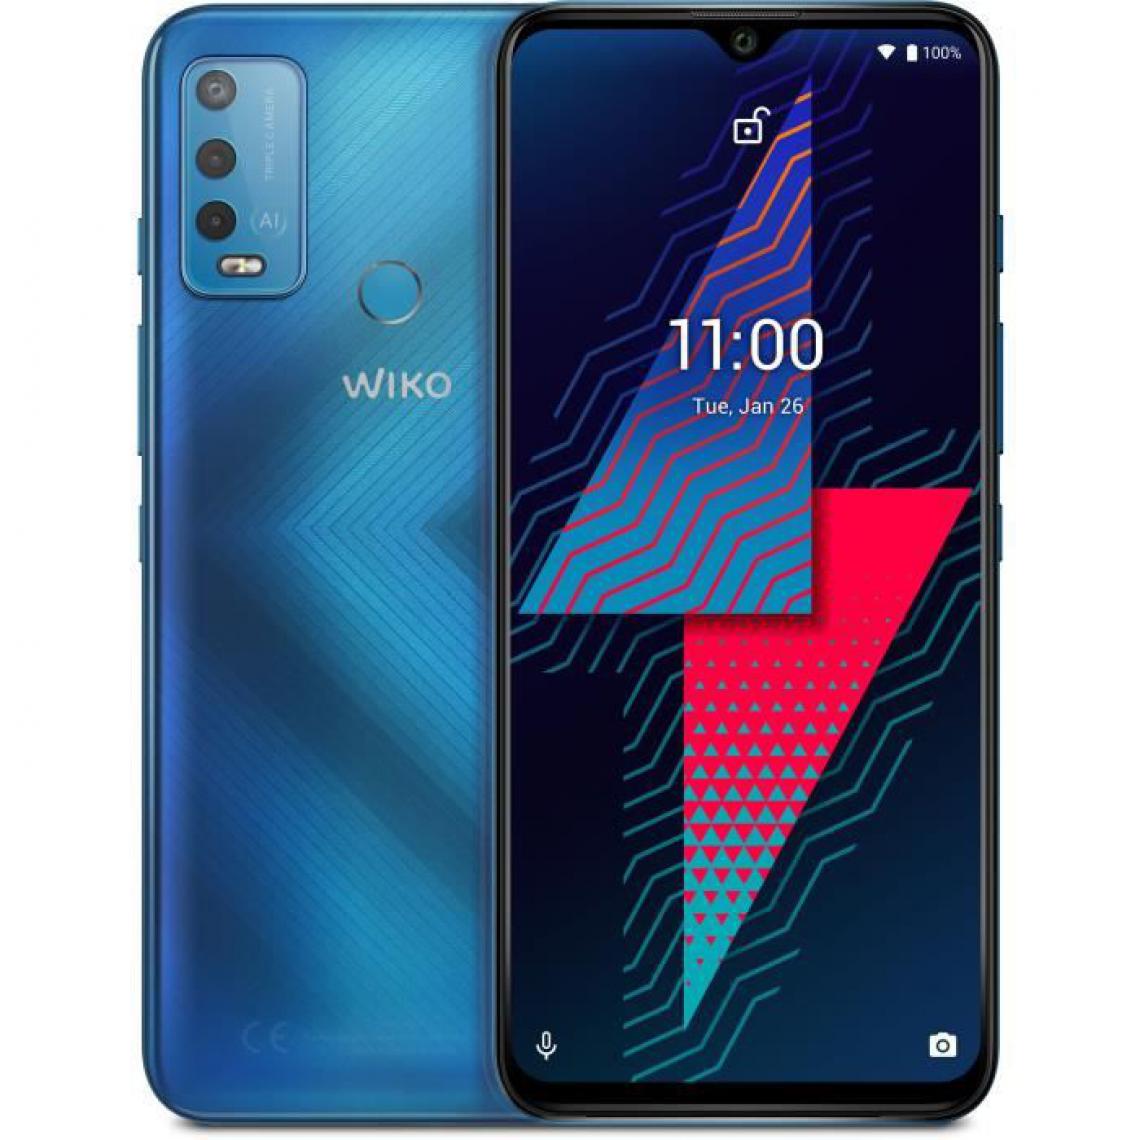 Wiko - Wiko Power U30 Midnight Blue 64Go - Smartphone Android